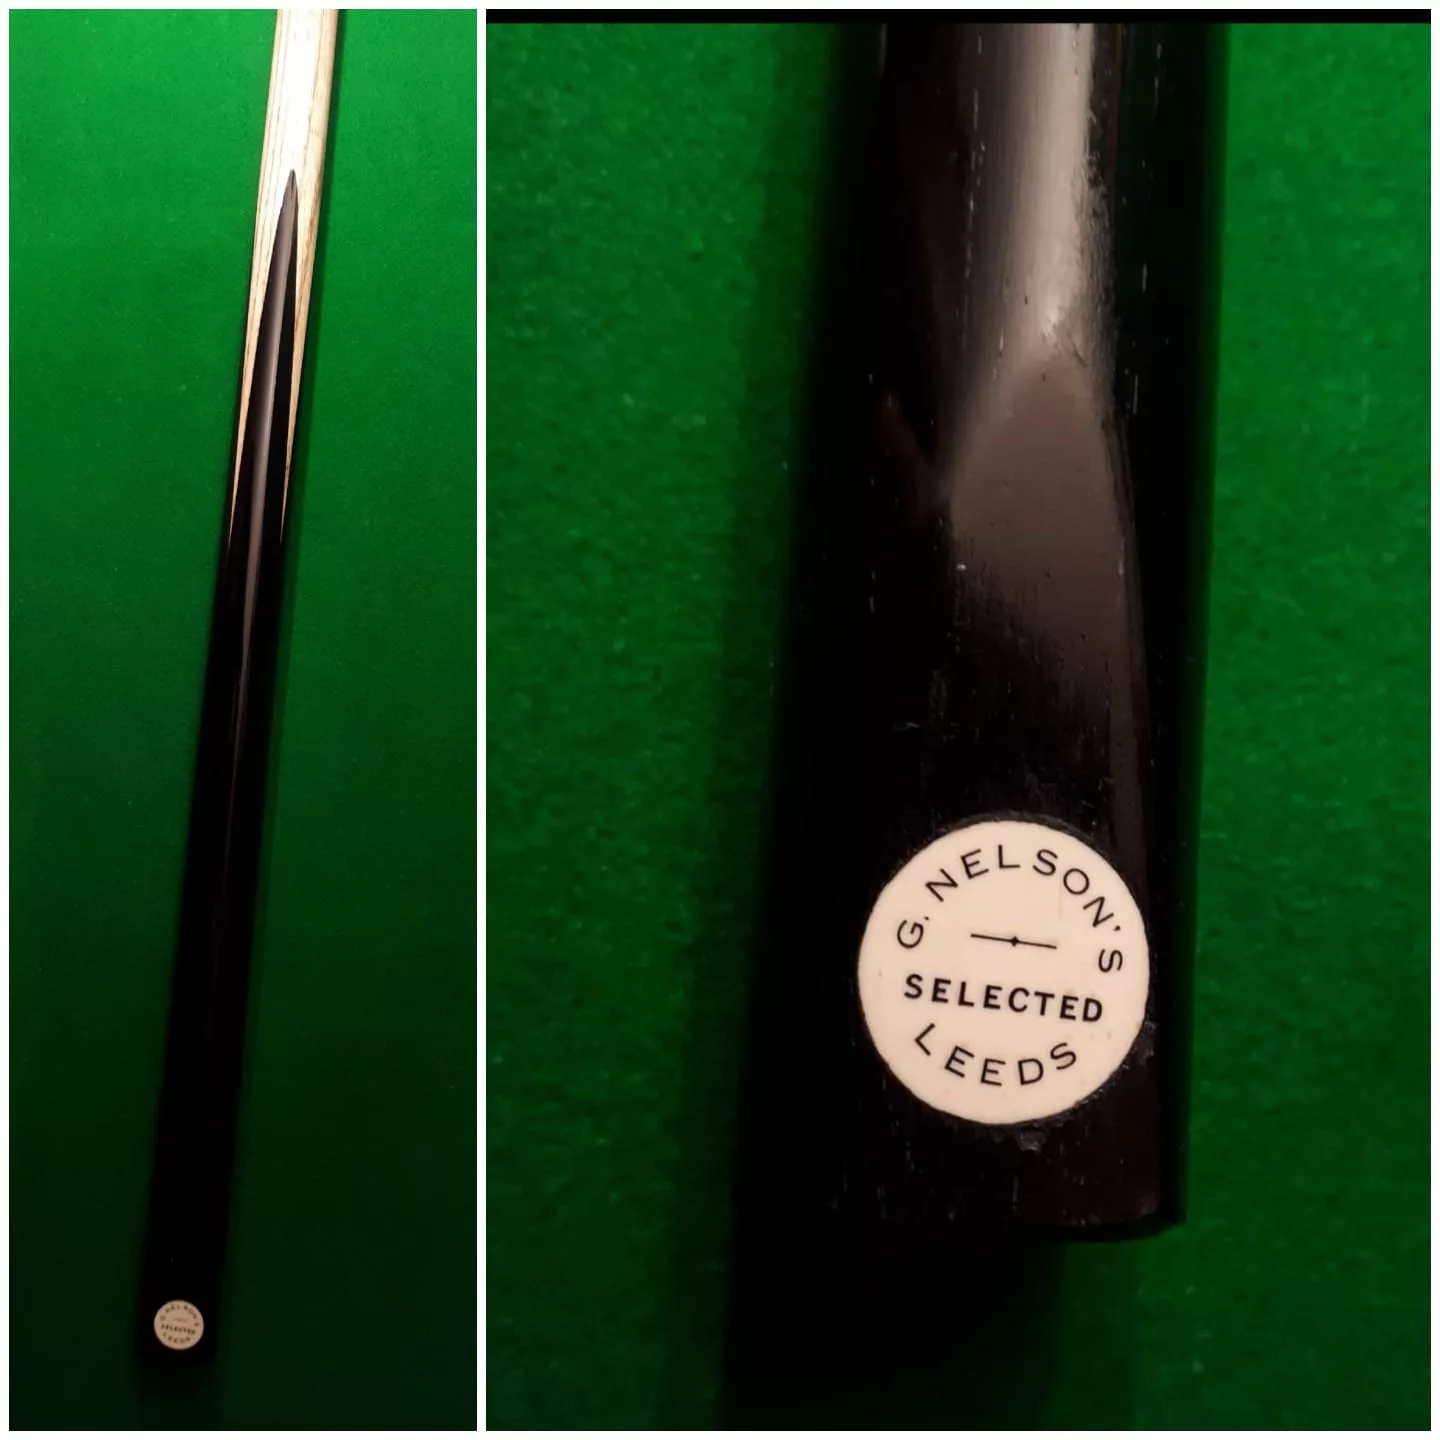 G Nelson Selected cue